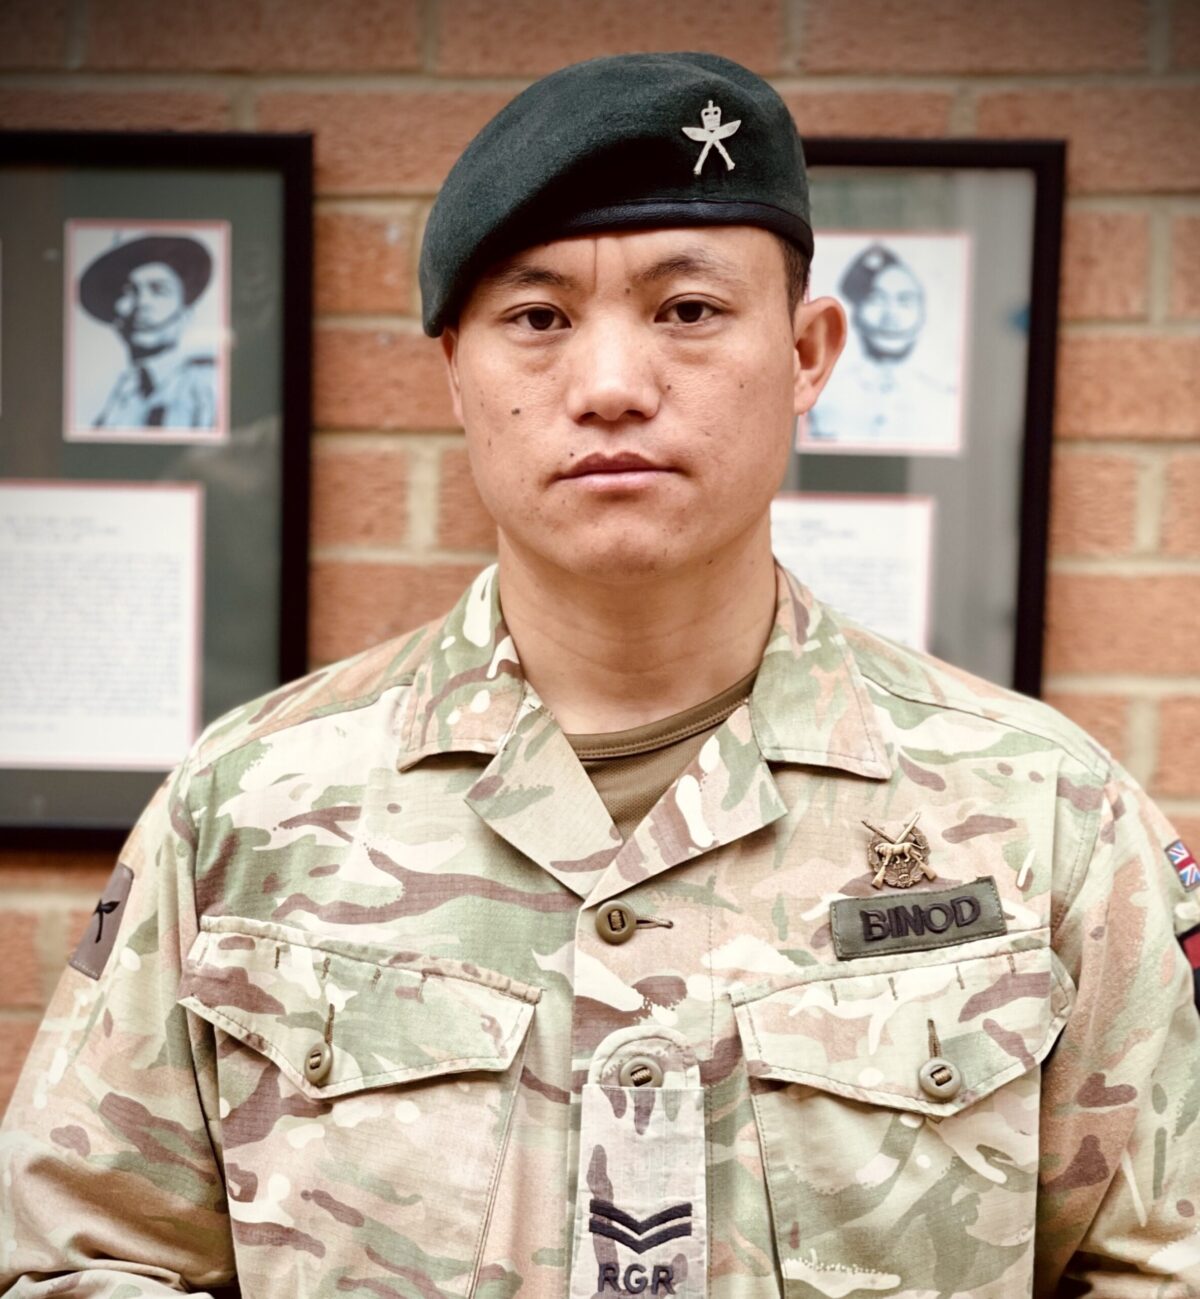 Infantry Training Centre Catterick, Commanding Officers’ Coins for Outstanding Contributions